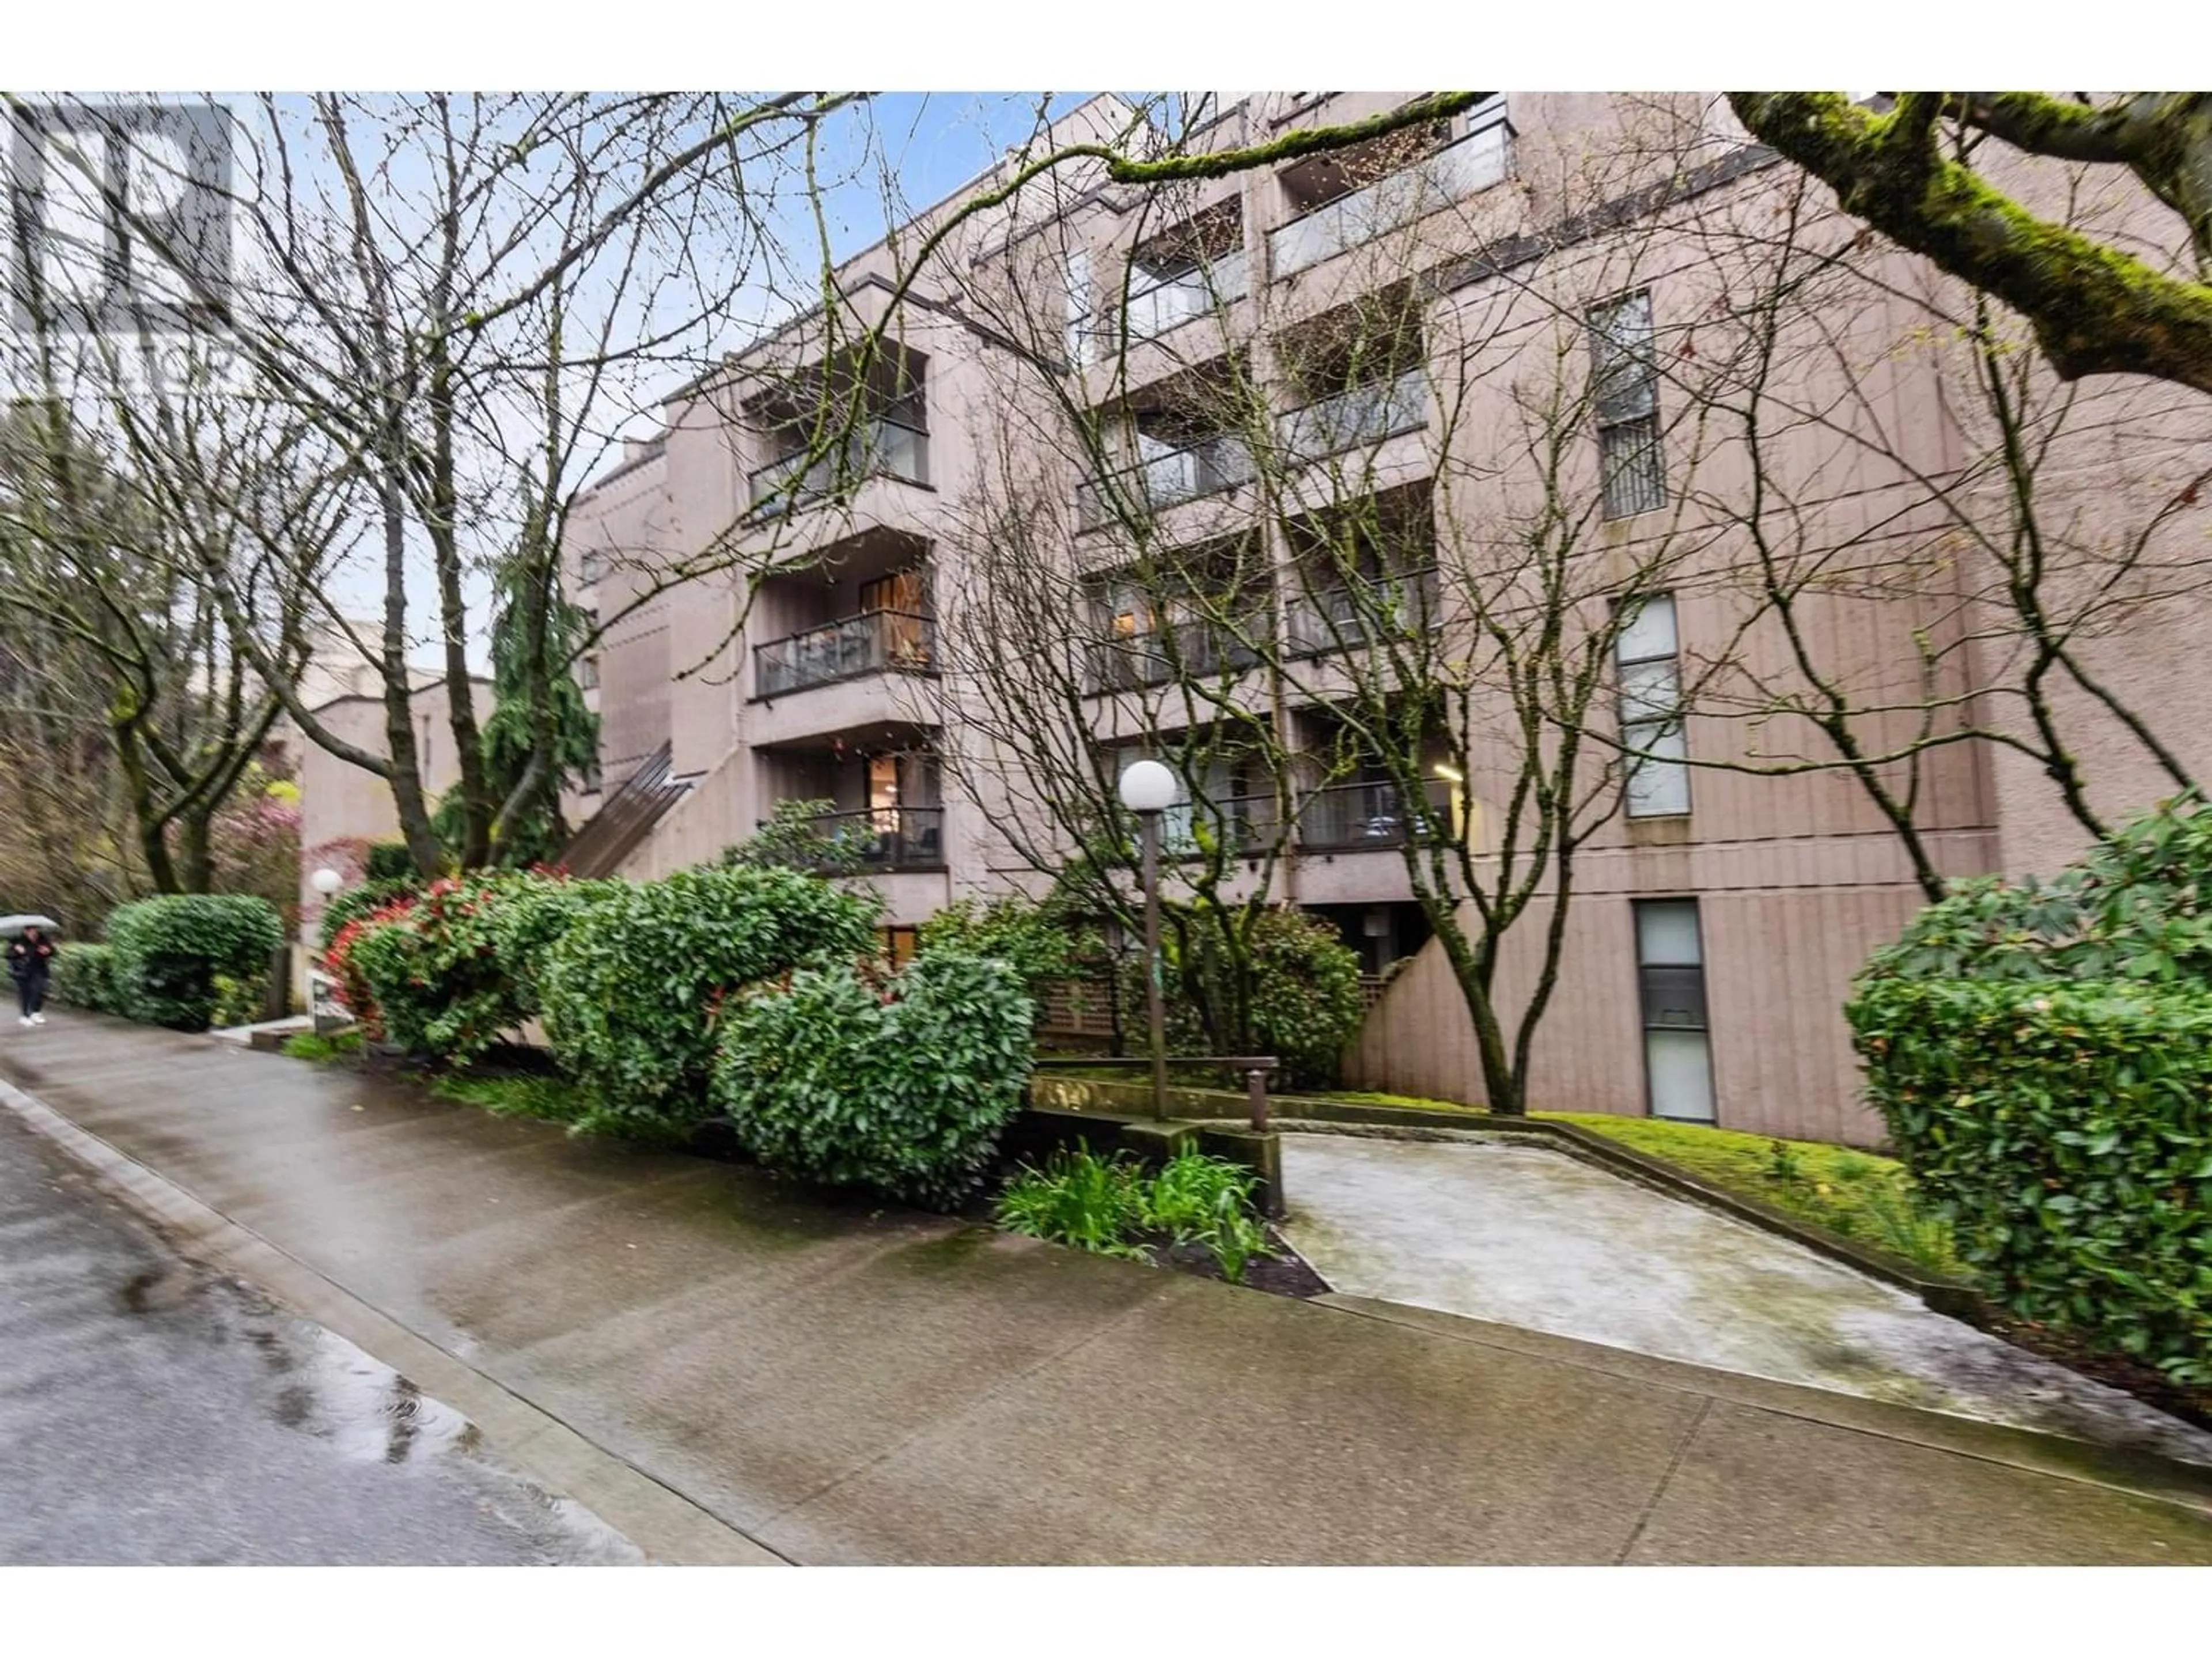 A pic from exterior of the house or condo for 214 1080 PACIFIC STREET, Vancouver British Columbia V6E4C2